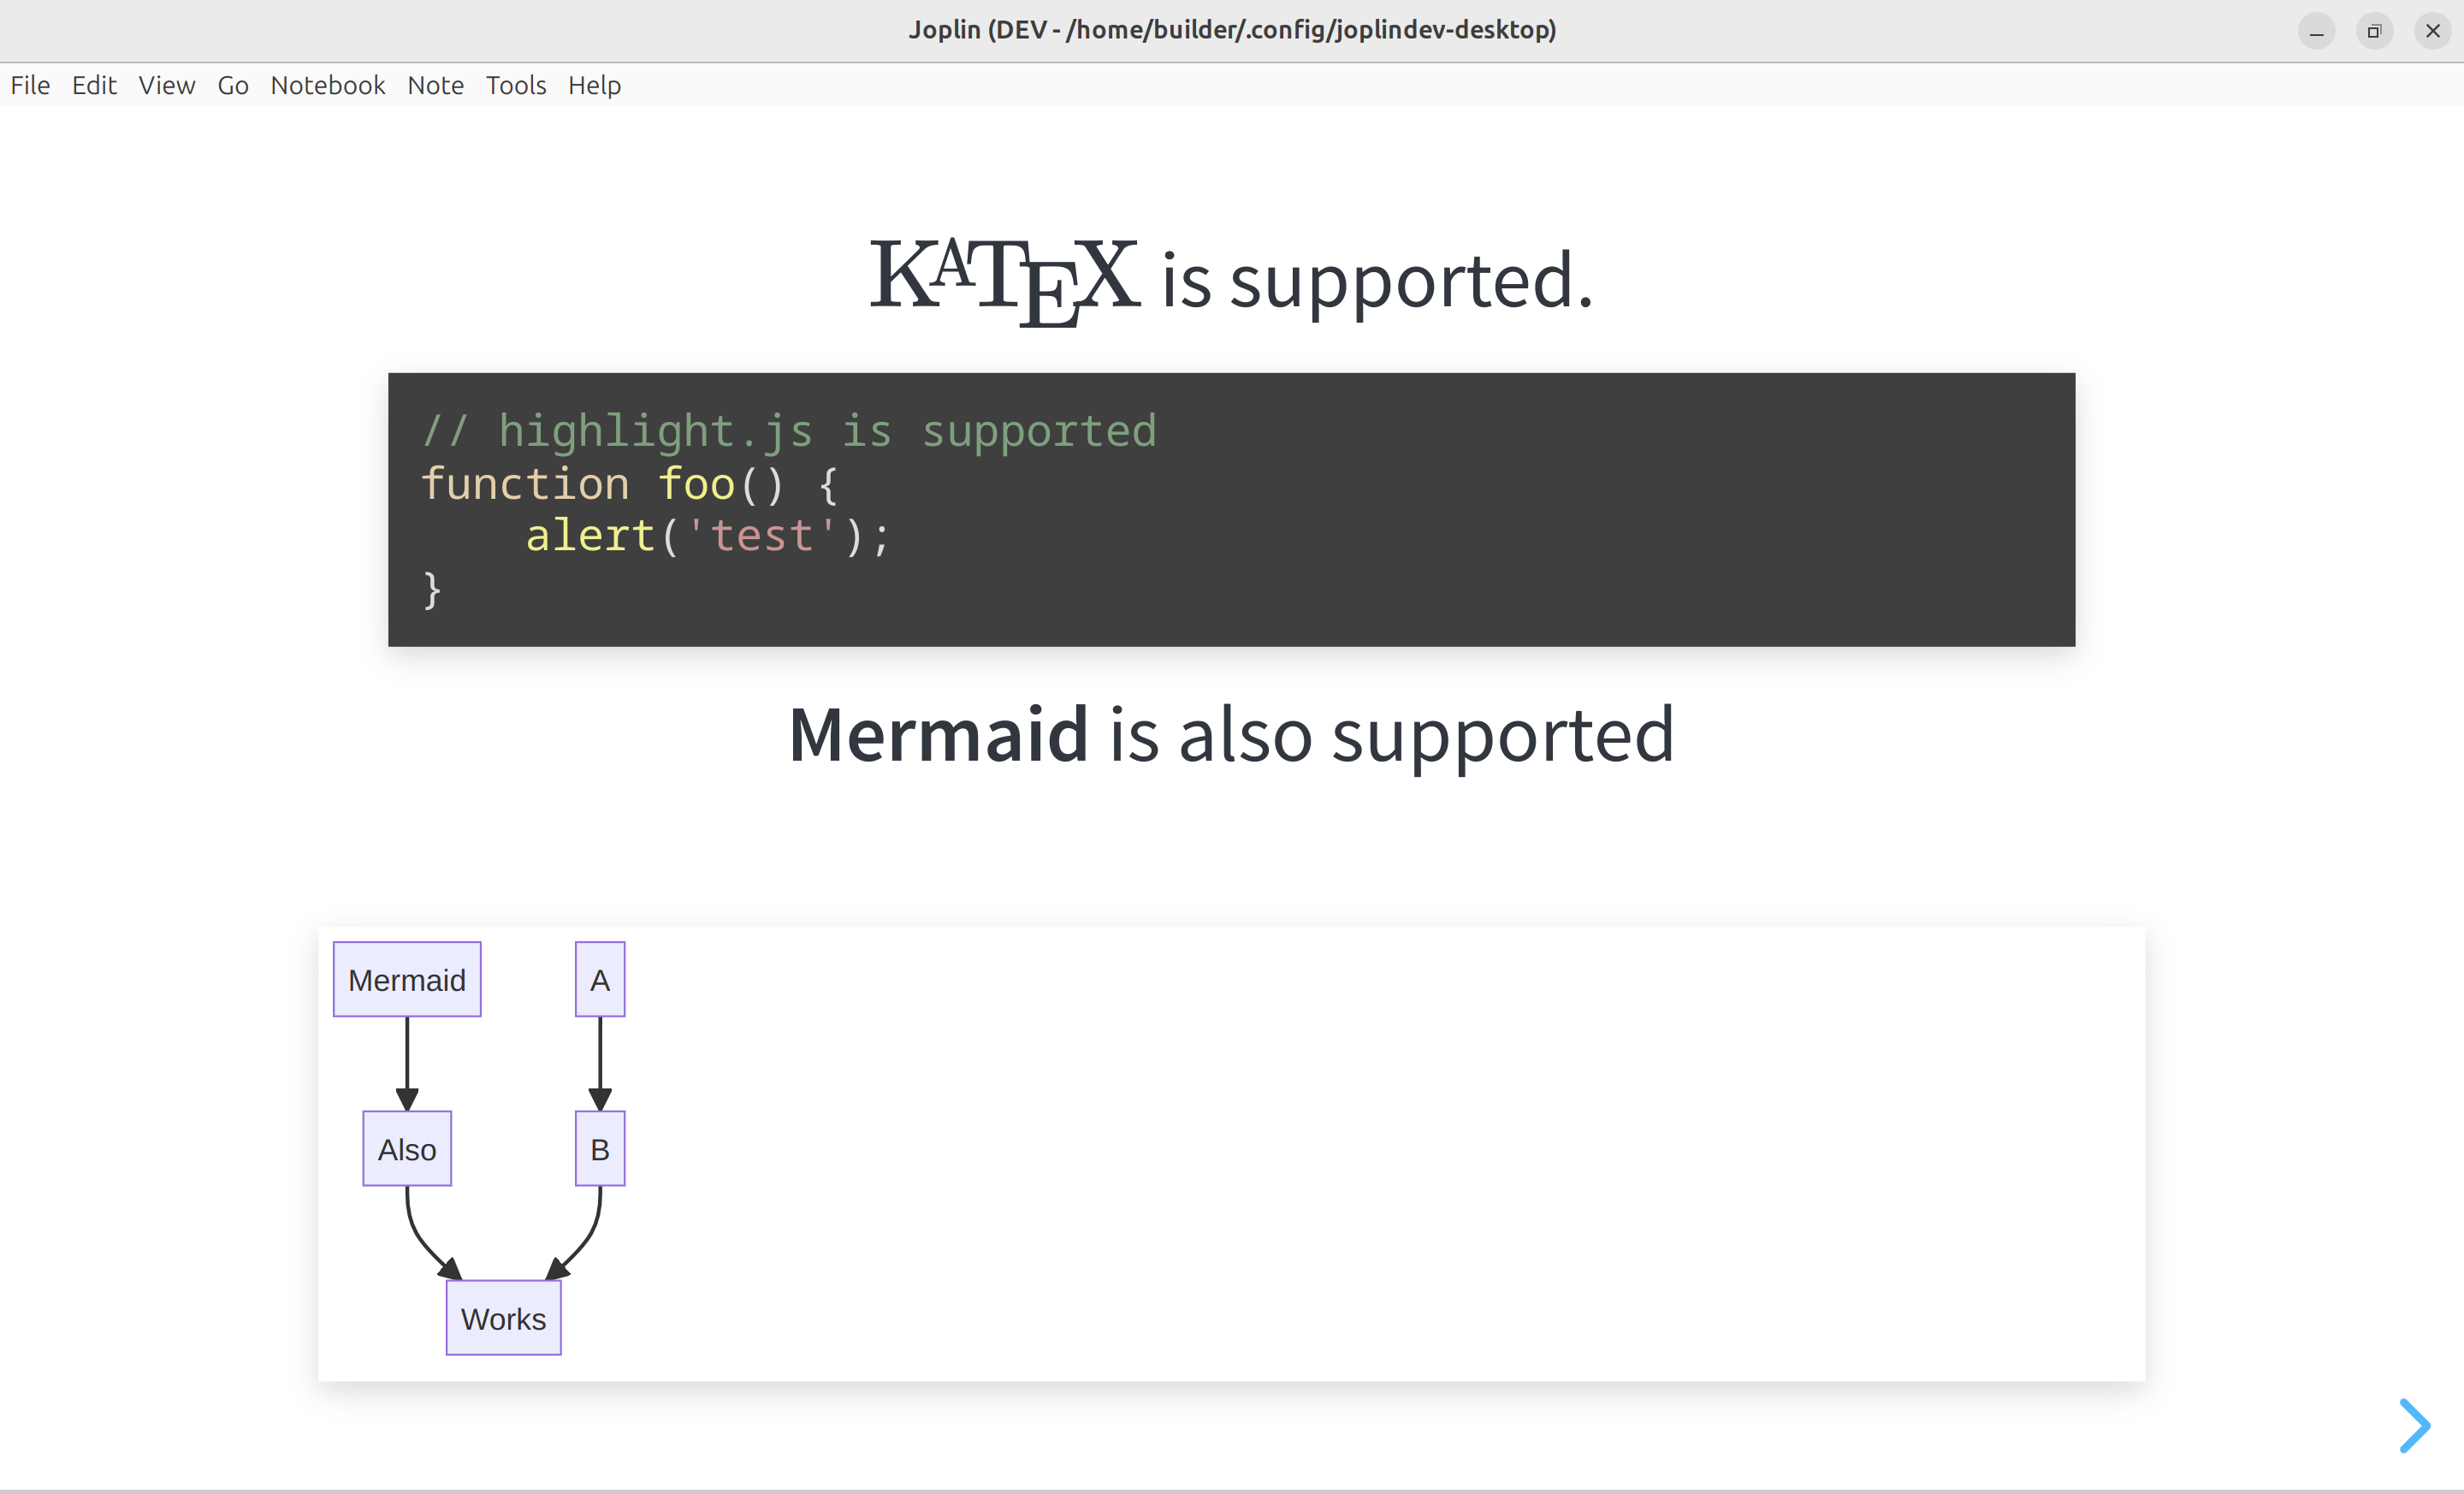 Screenshot: A Joplin plugin window showing a slideshow. The current slide states that KaTeX, highlight.js, and Mermaid are supported.